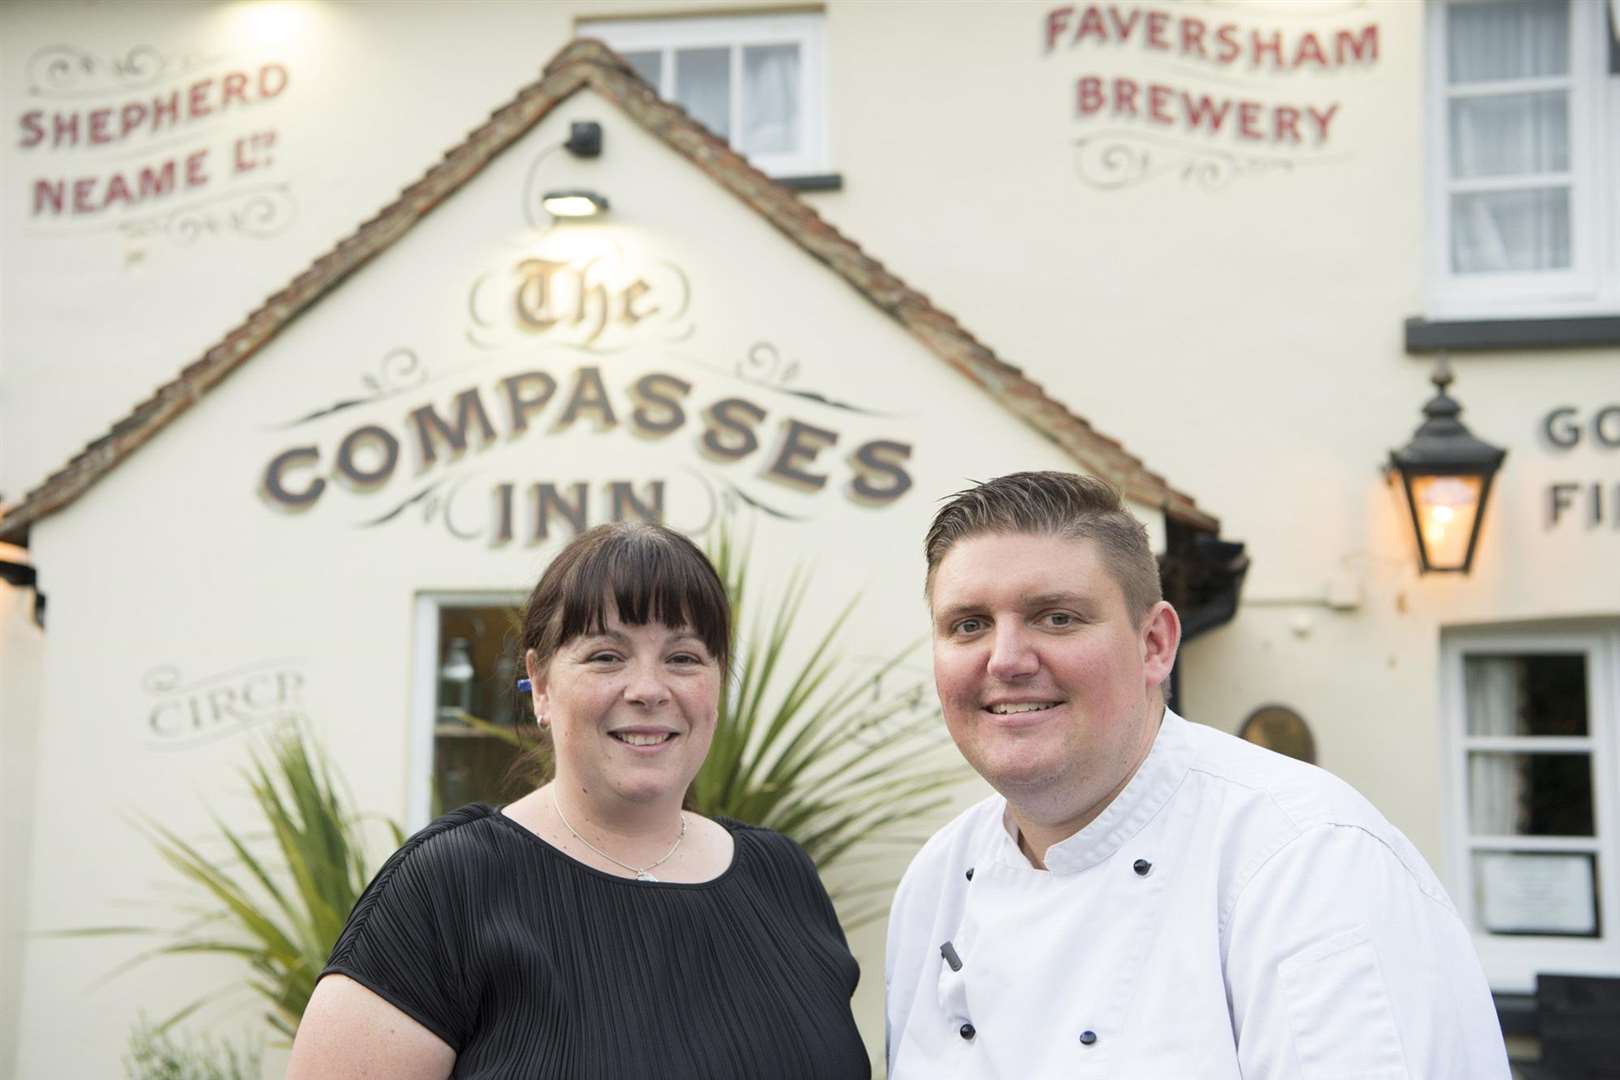 Donna and Rob Taylor at the Compasses Inn (6930932)